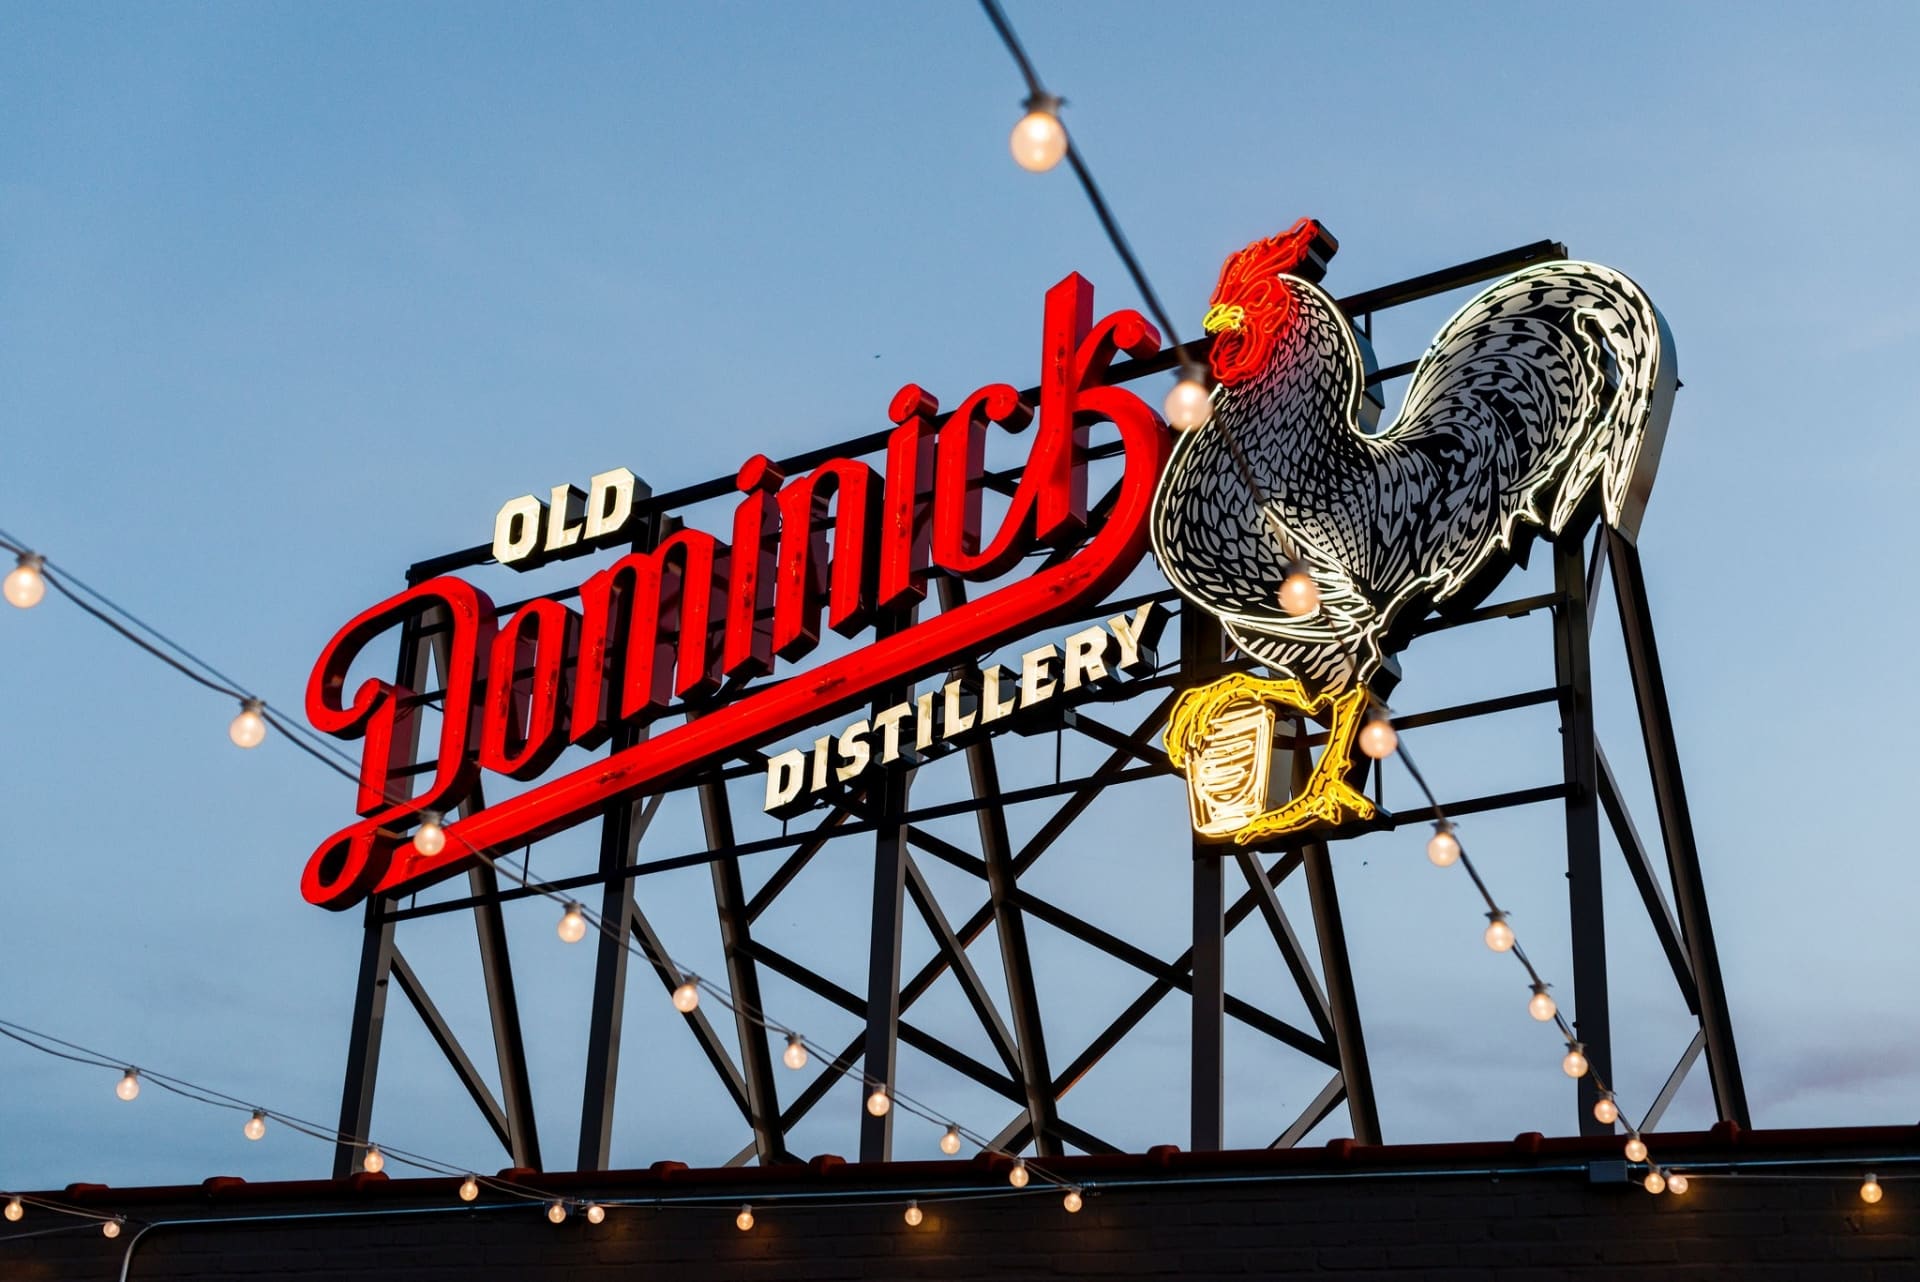 The Old Dominick Distillery sign